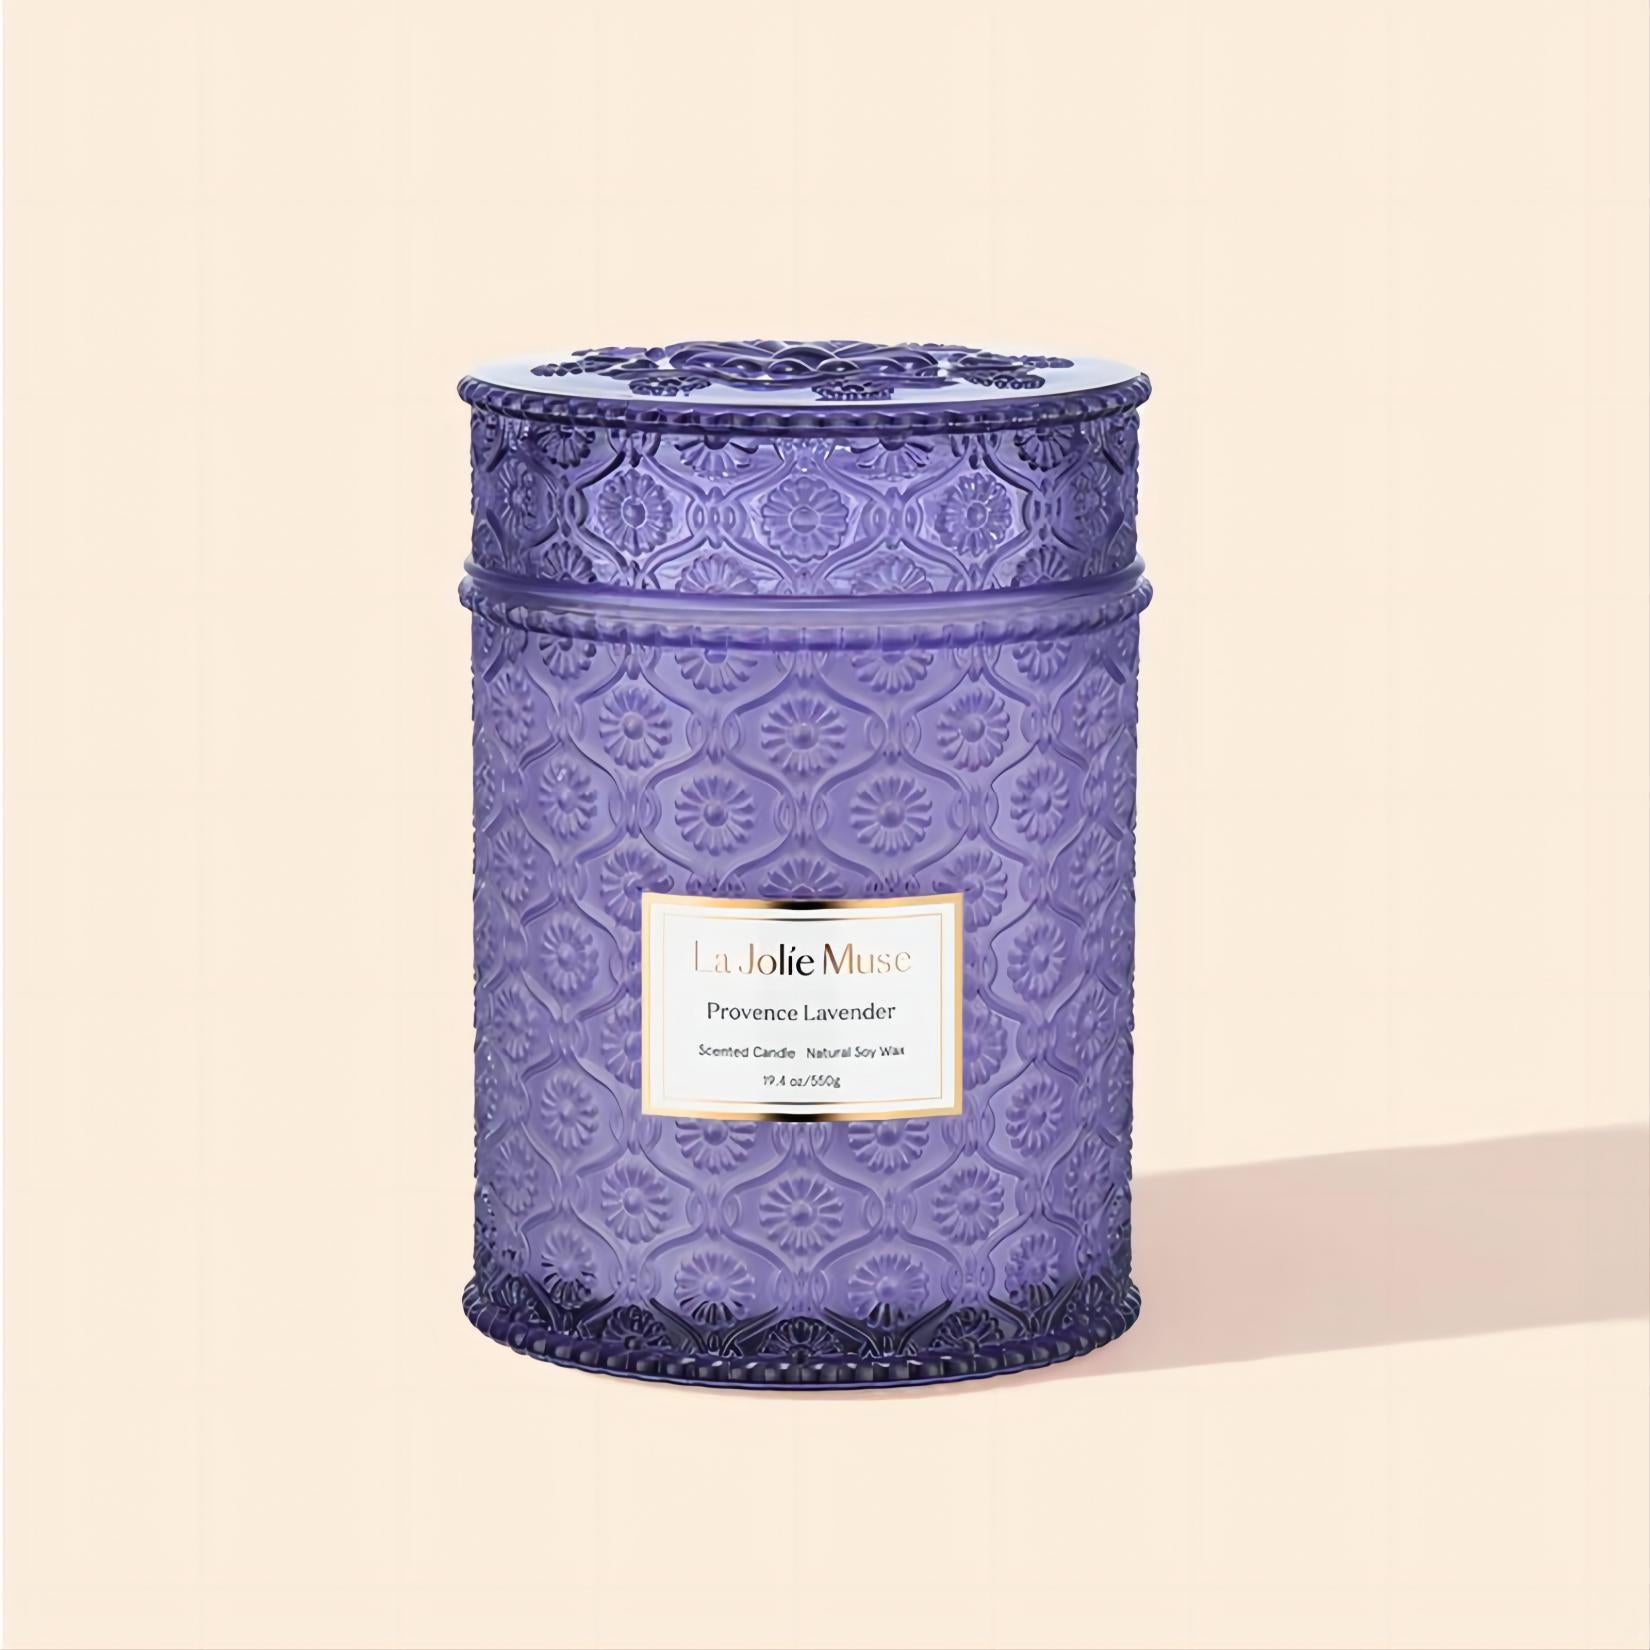 Product Shot of Maelyn - Provence Lavender 19.4oz candle in the middle